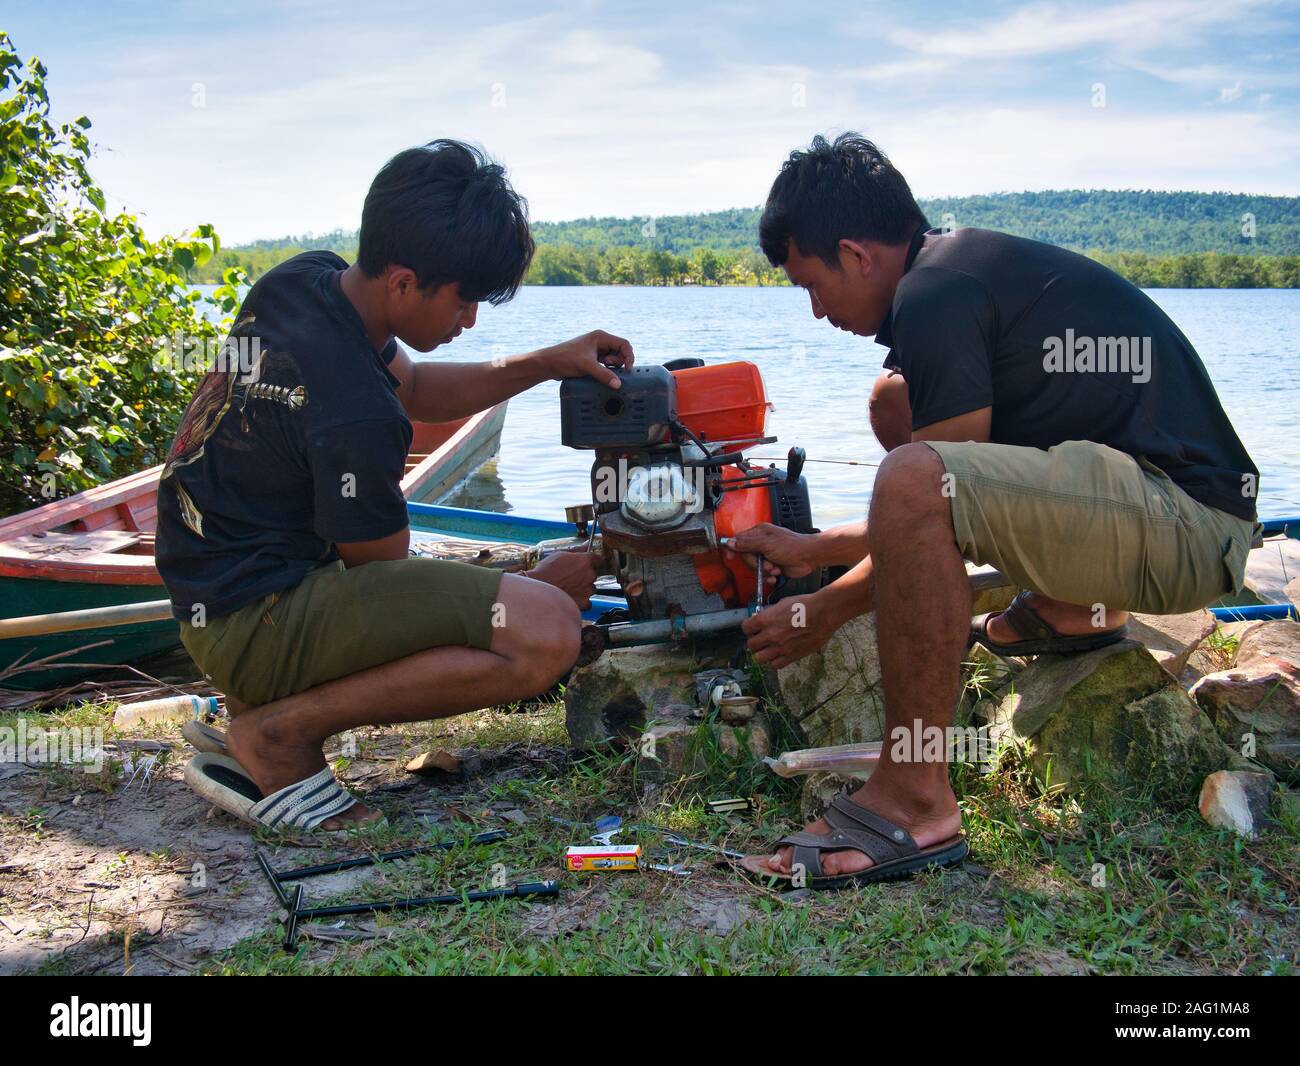 Two young men repair a longtail outboard motor in a remote rural village in Koh Kong Province in Cambodia. Stock Photo